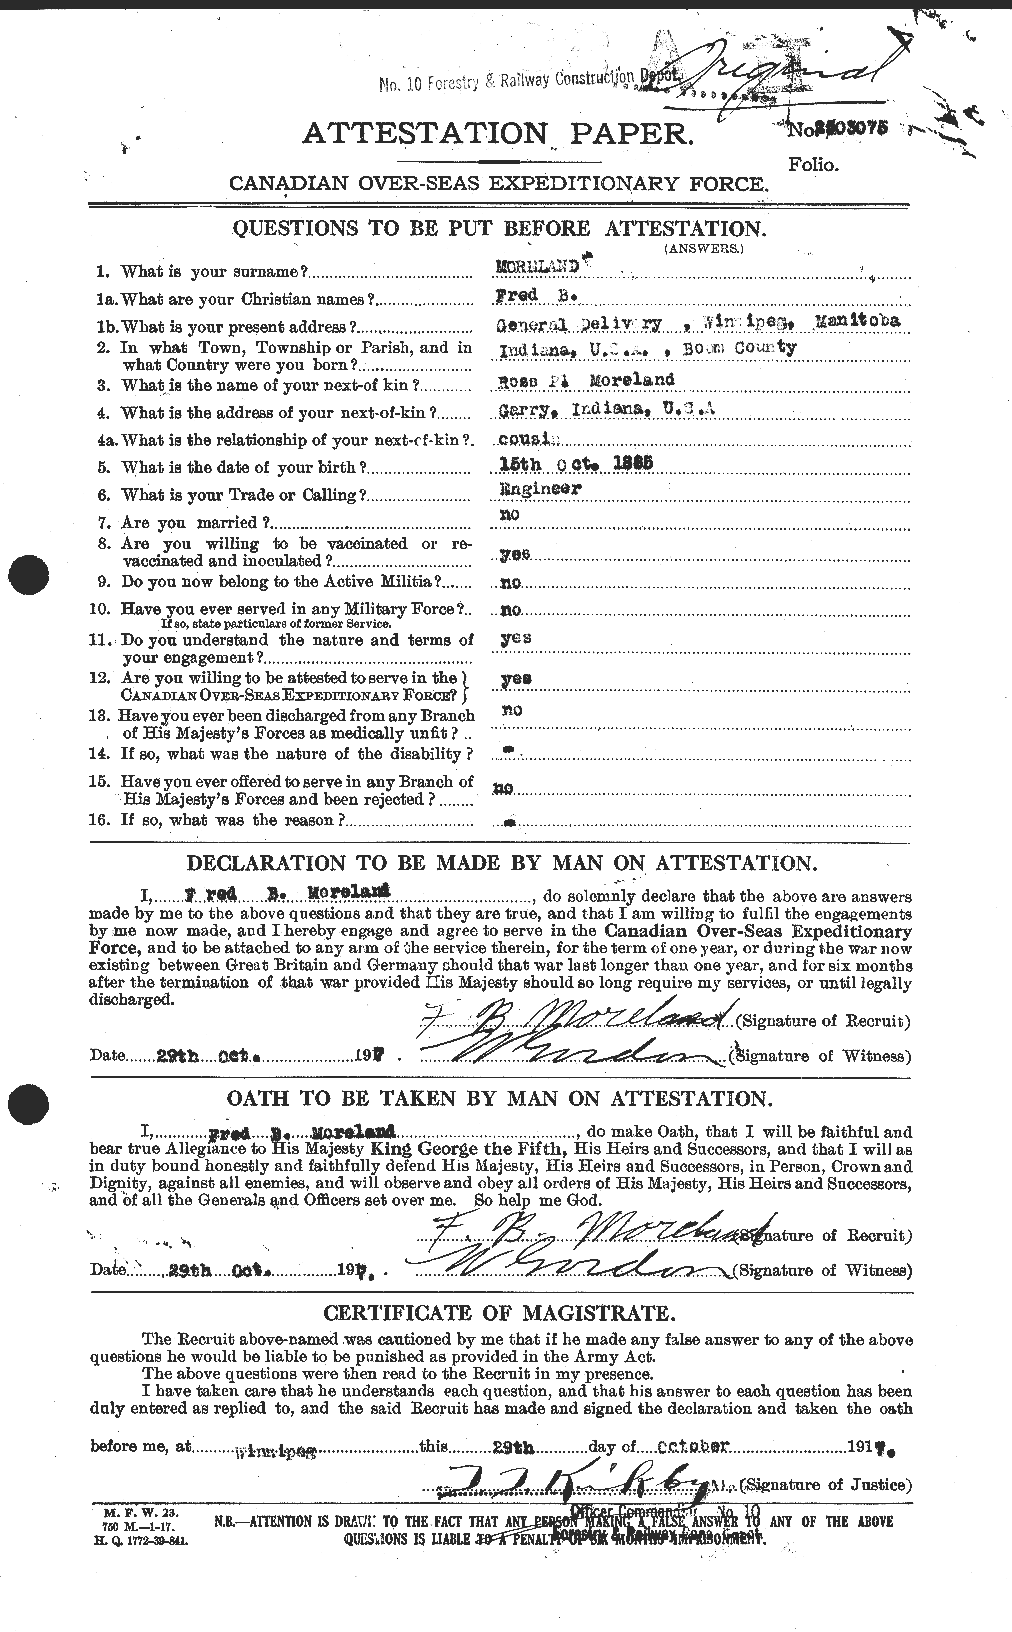 Personnel Records of the First World War - CEF 507450a